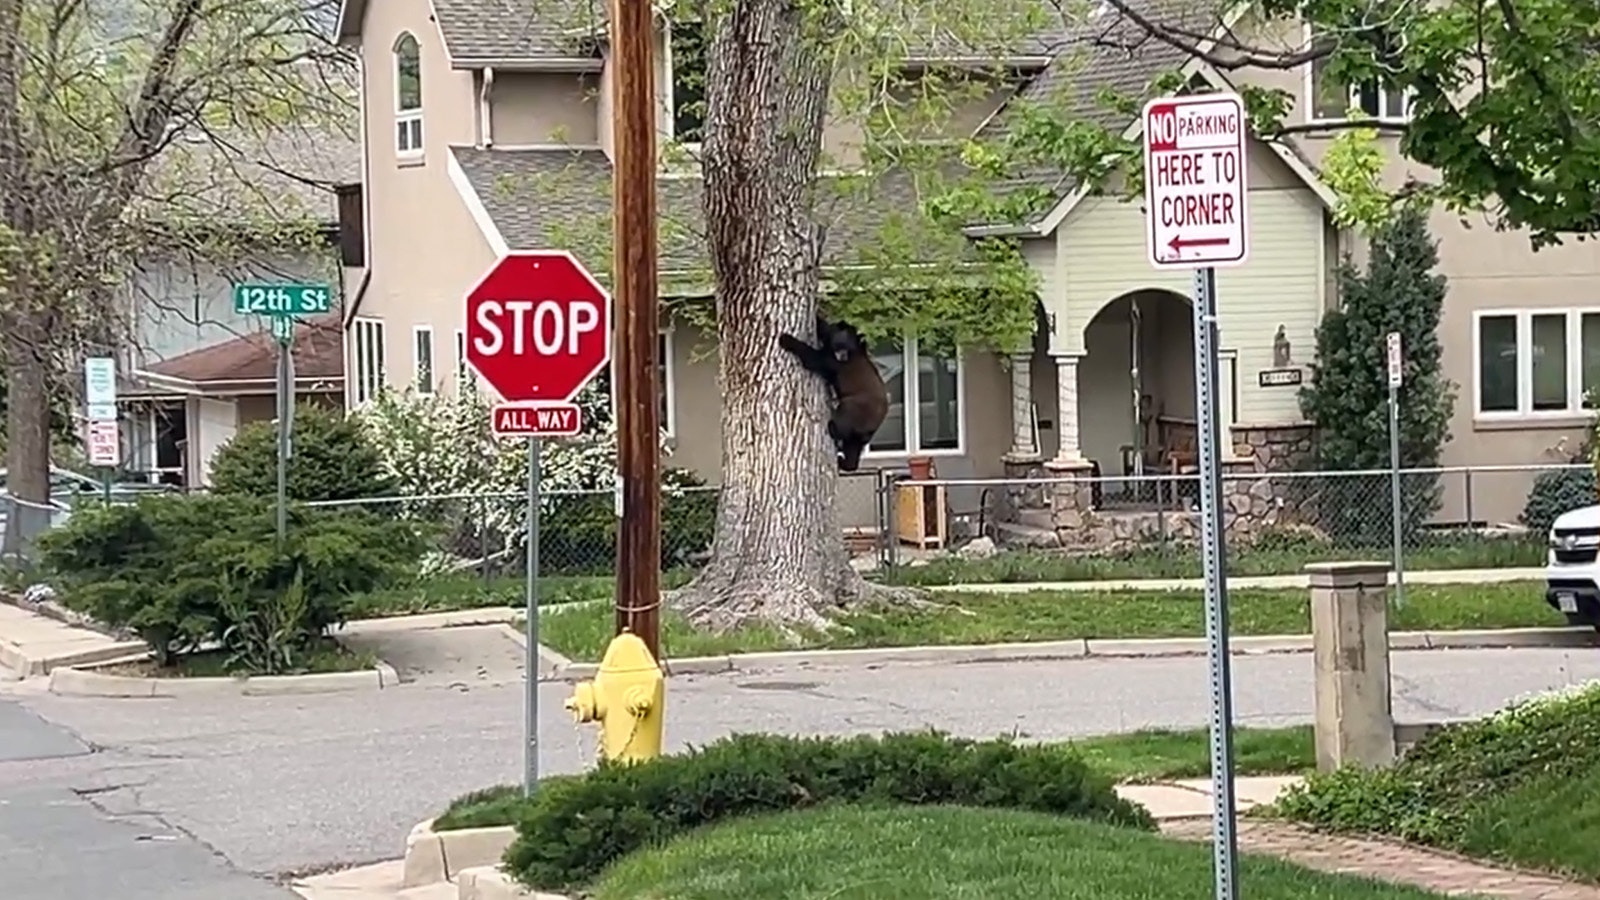 This black bear was treed for hours in a Golden, Colorado, neighborhood. In a final effort to flush the bear out, wildlife officials blased Black Sabbath's "Iron Man" at it. Seems, as the agency posted, "black bears don't mind Black Sabbath."